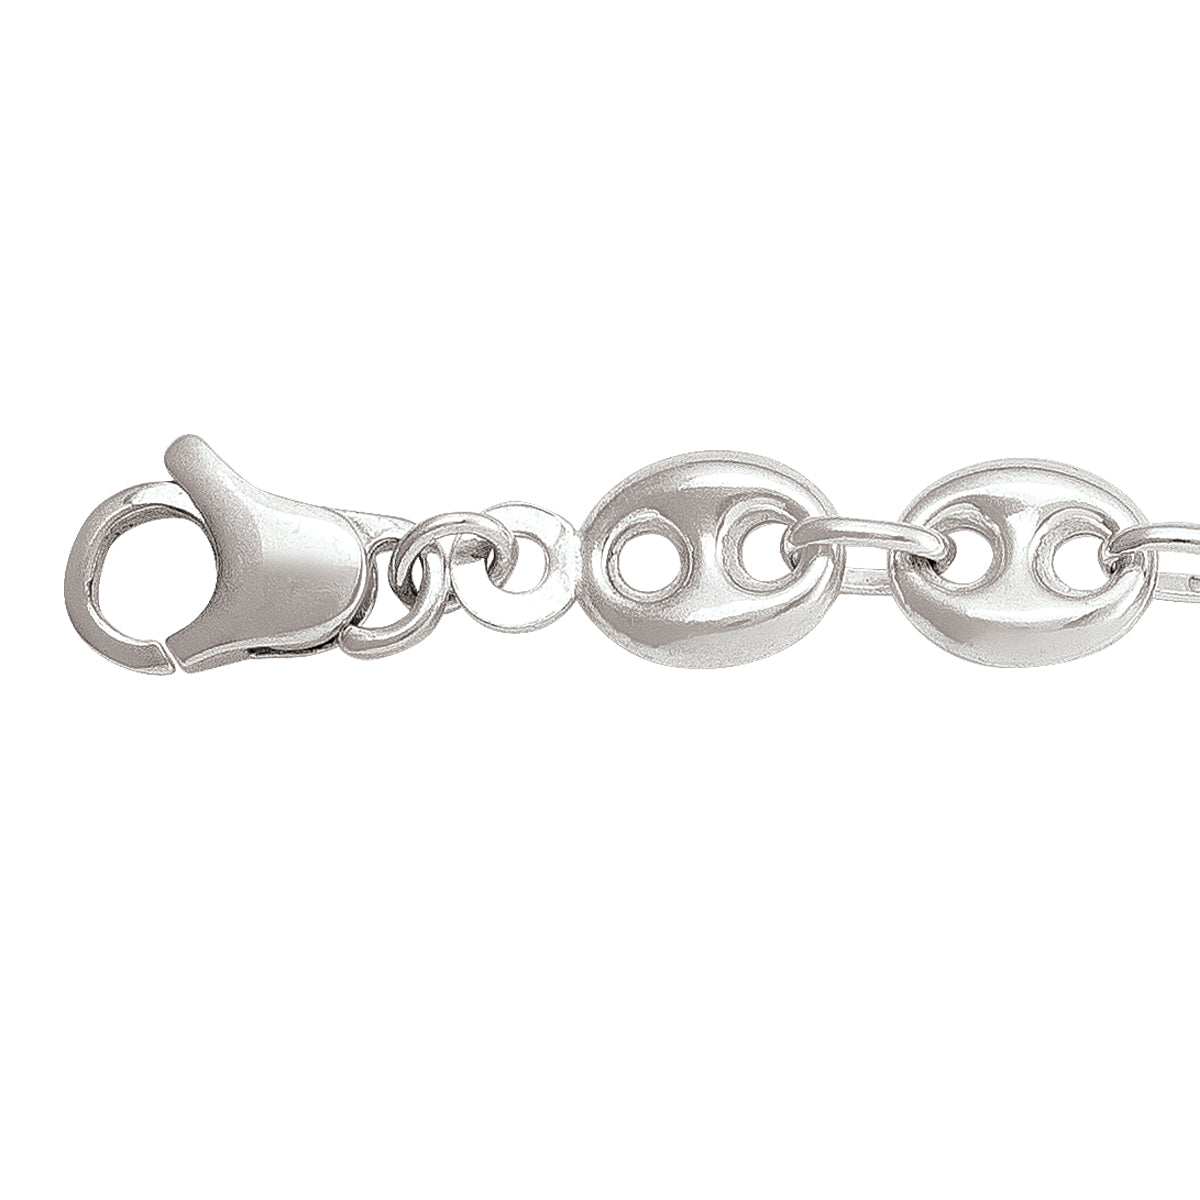 BRACELETS SILVER HOLLOW PUFFED ANCHOR LINK CHAIN